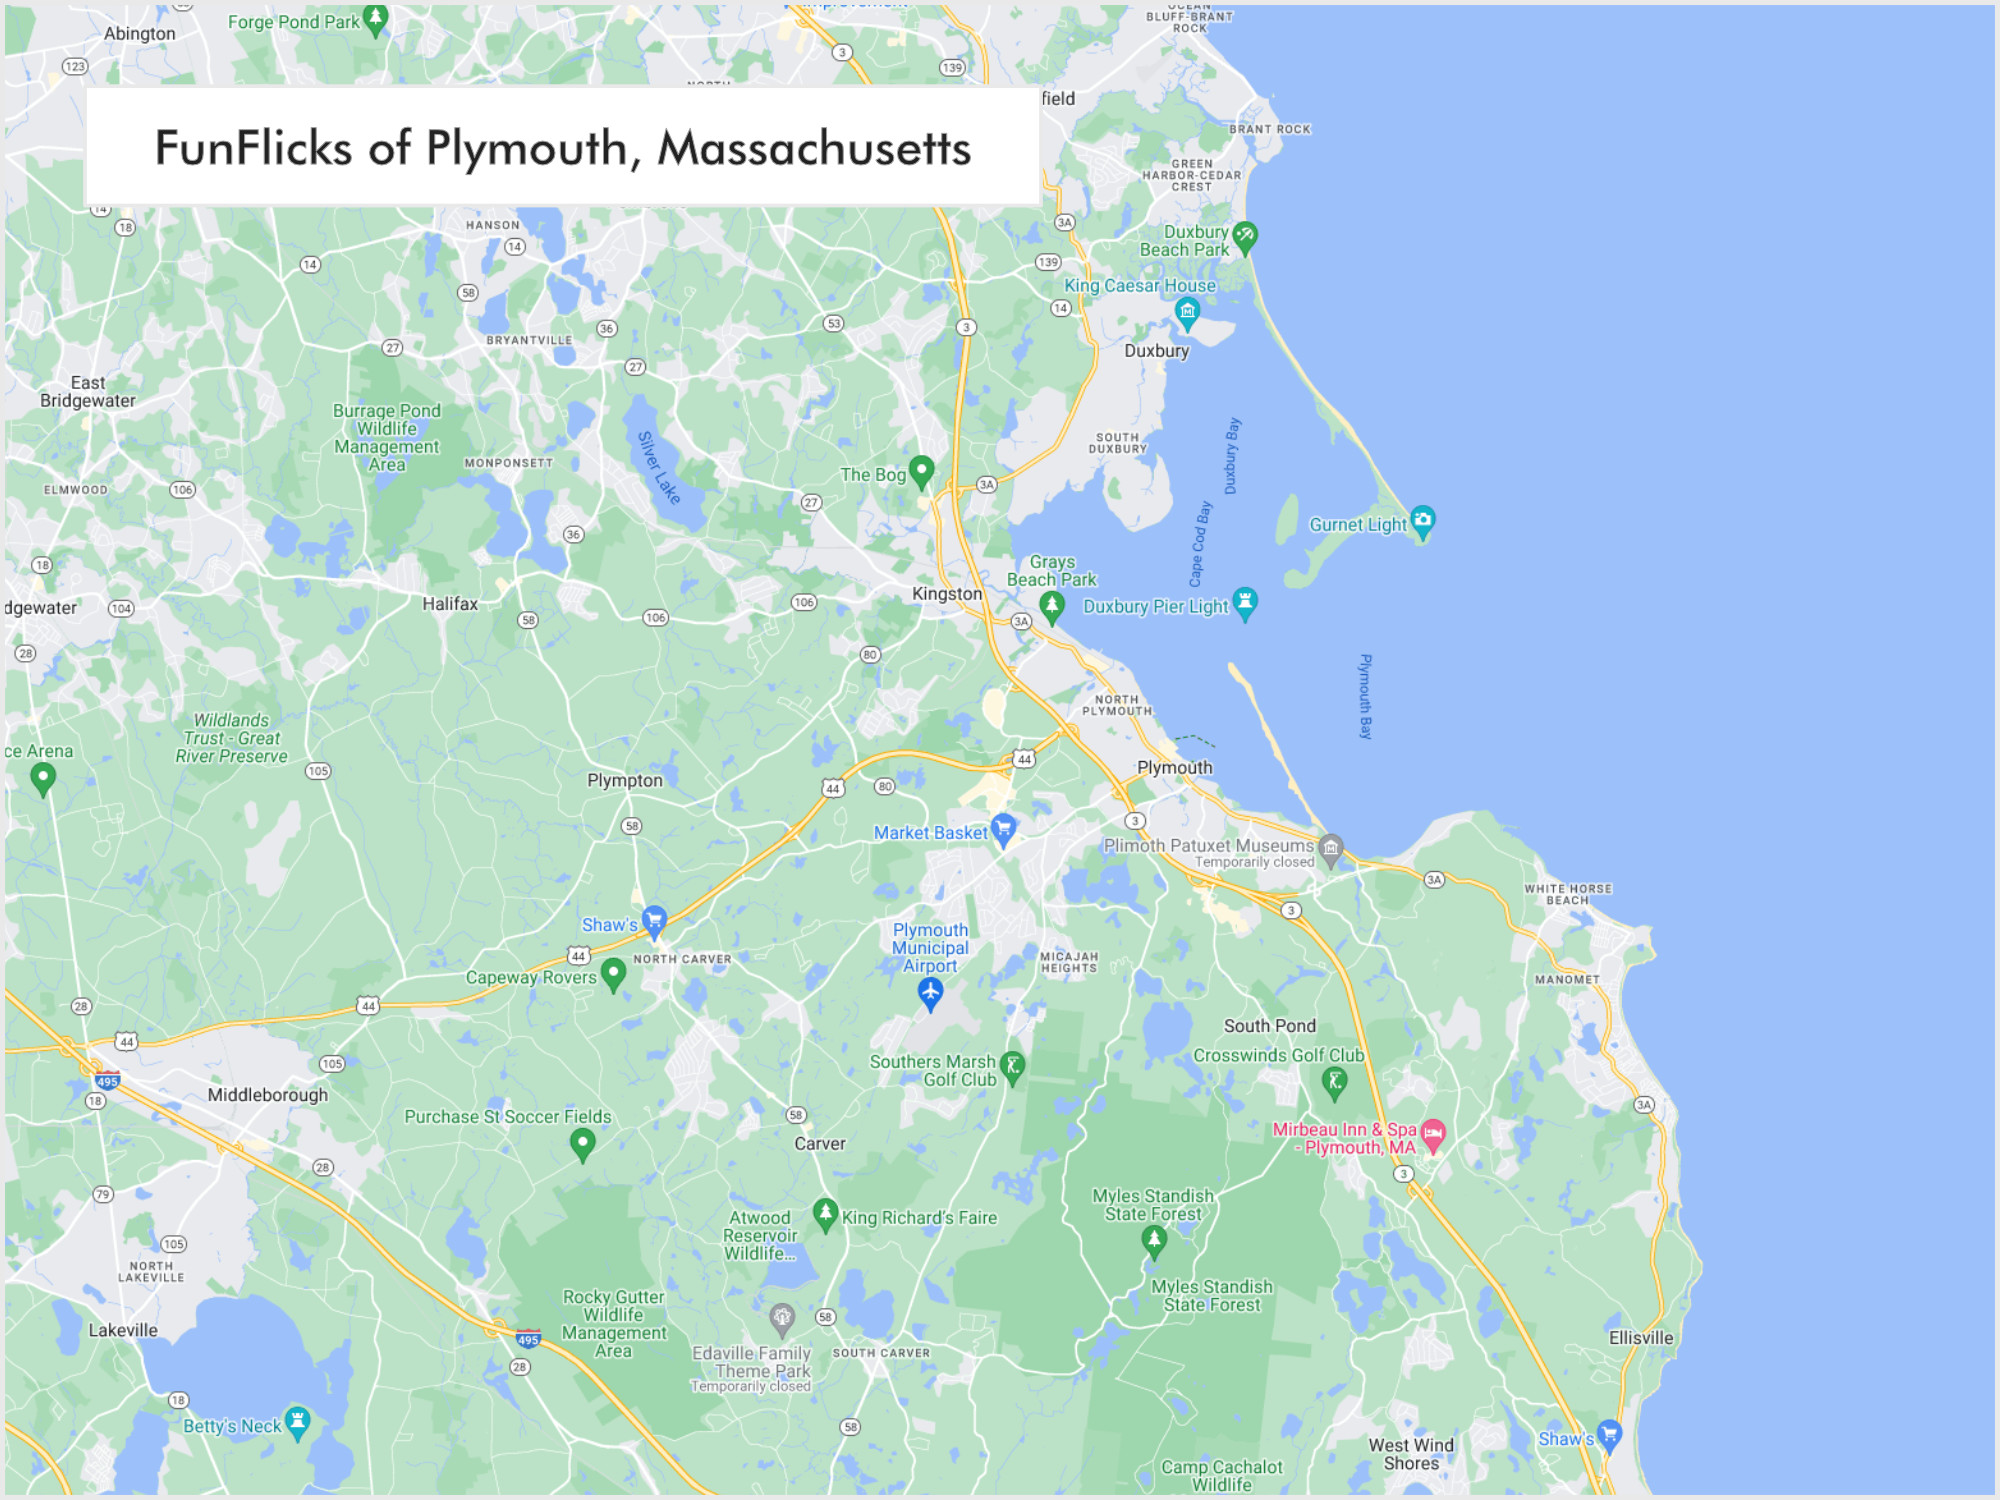 FunFlicks® Plymouth territory map